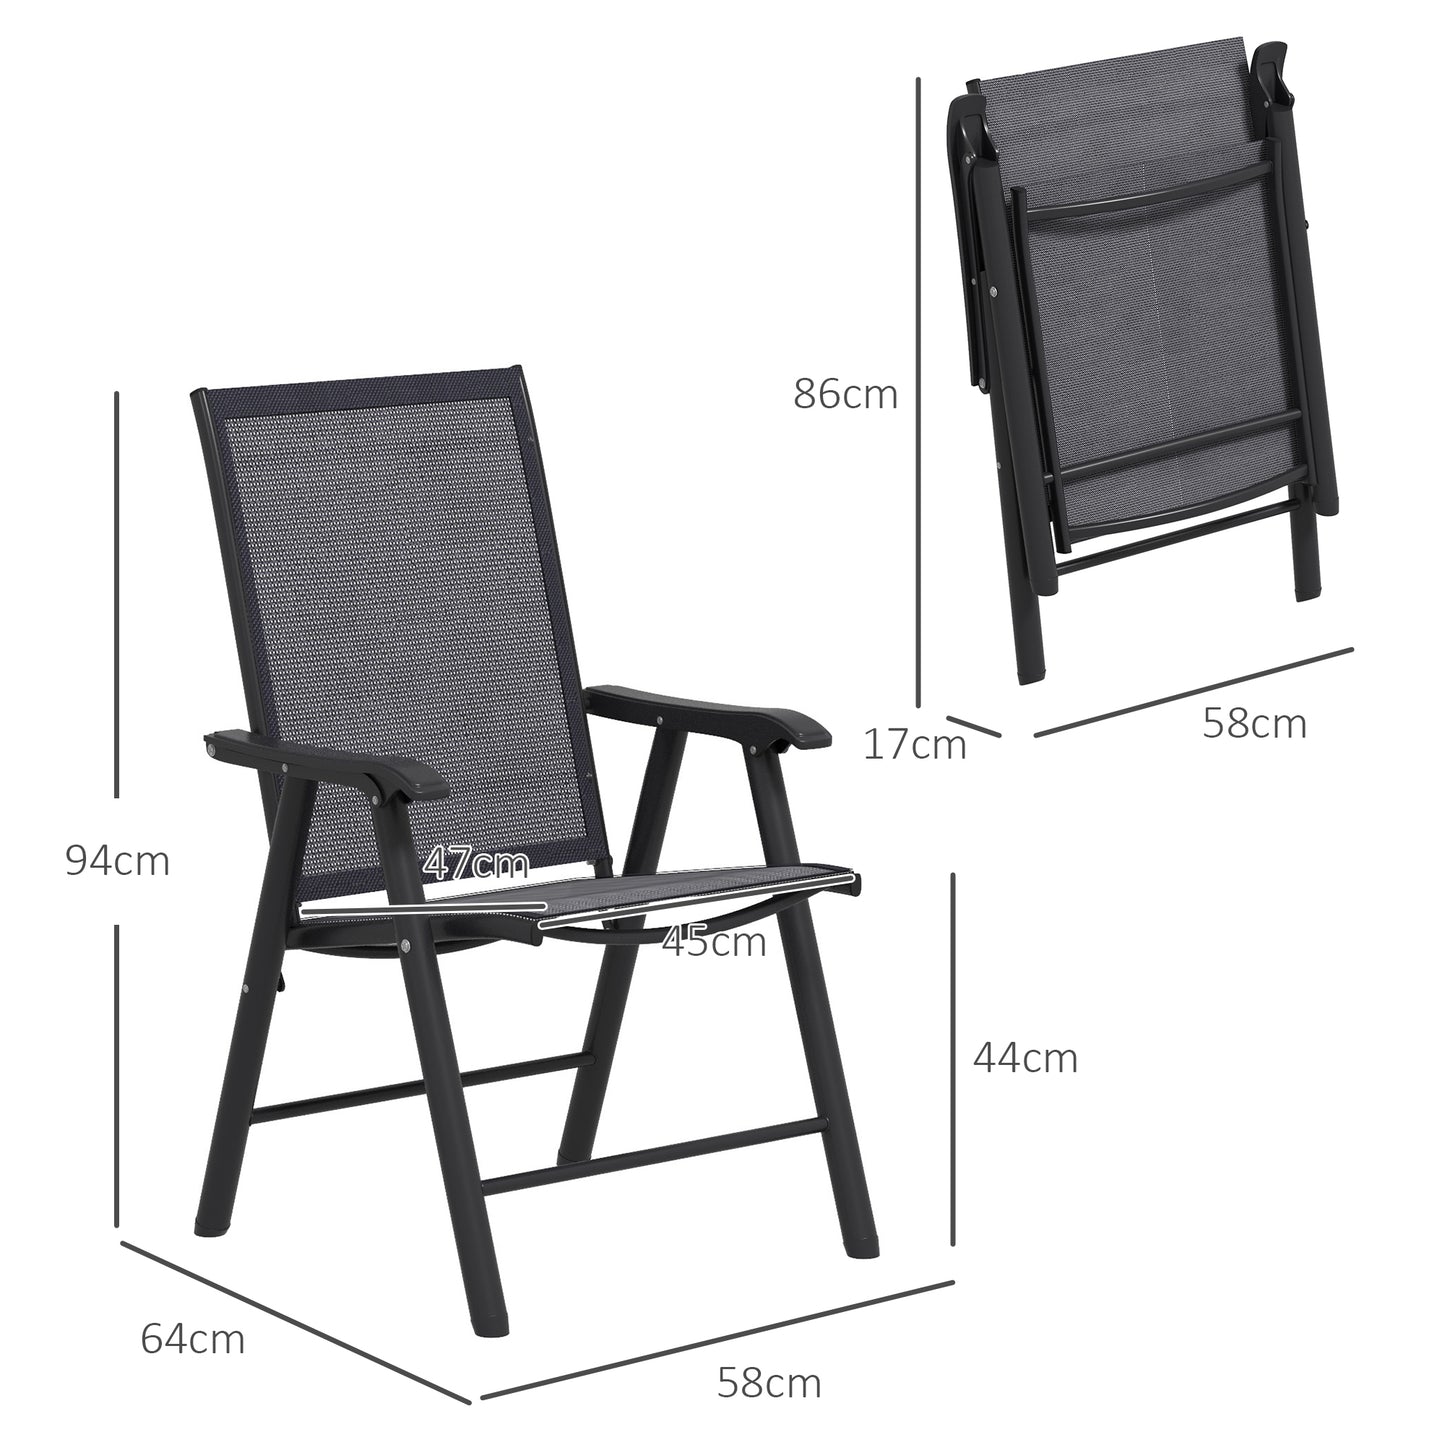 Outsunny Set of 2 Foldable Metal Garden Chairs Outdoor Patio Park Dining Seat Yard Furniture Dark Grey